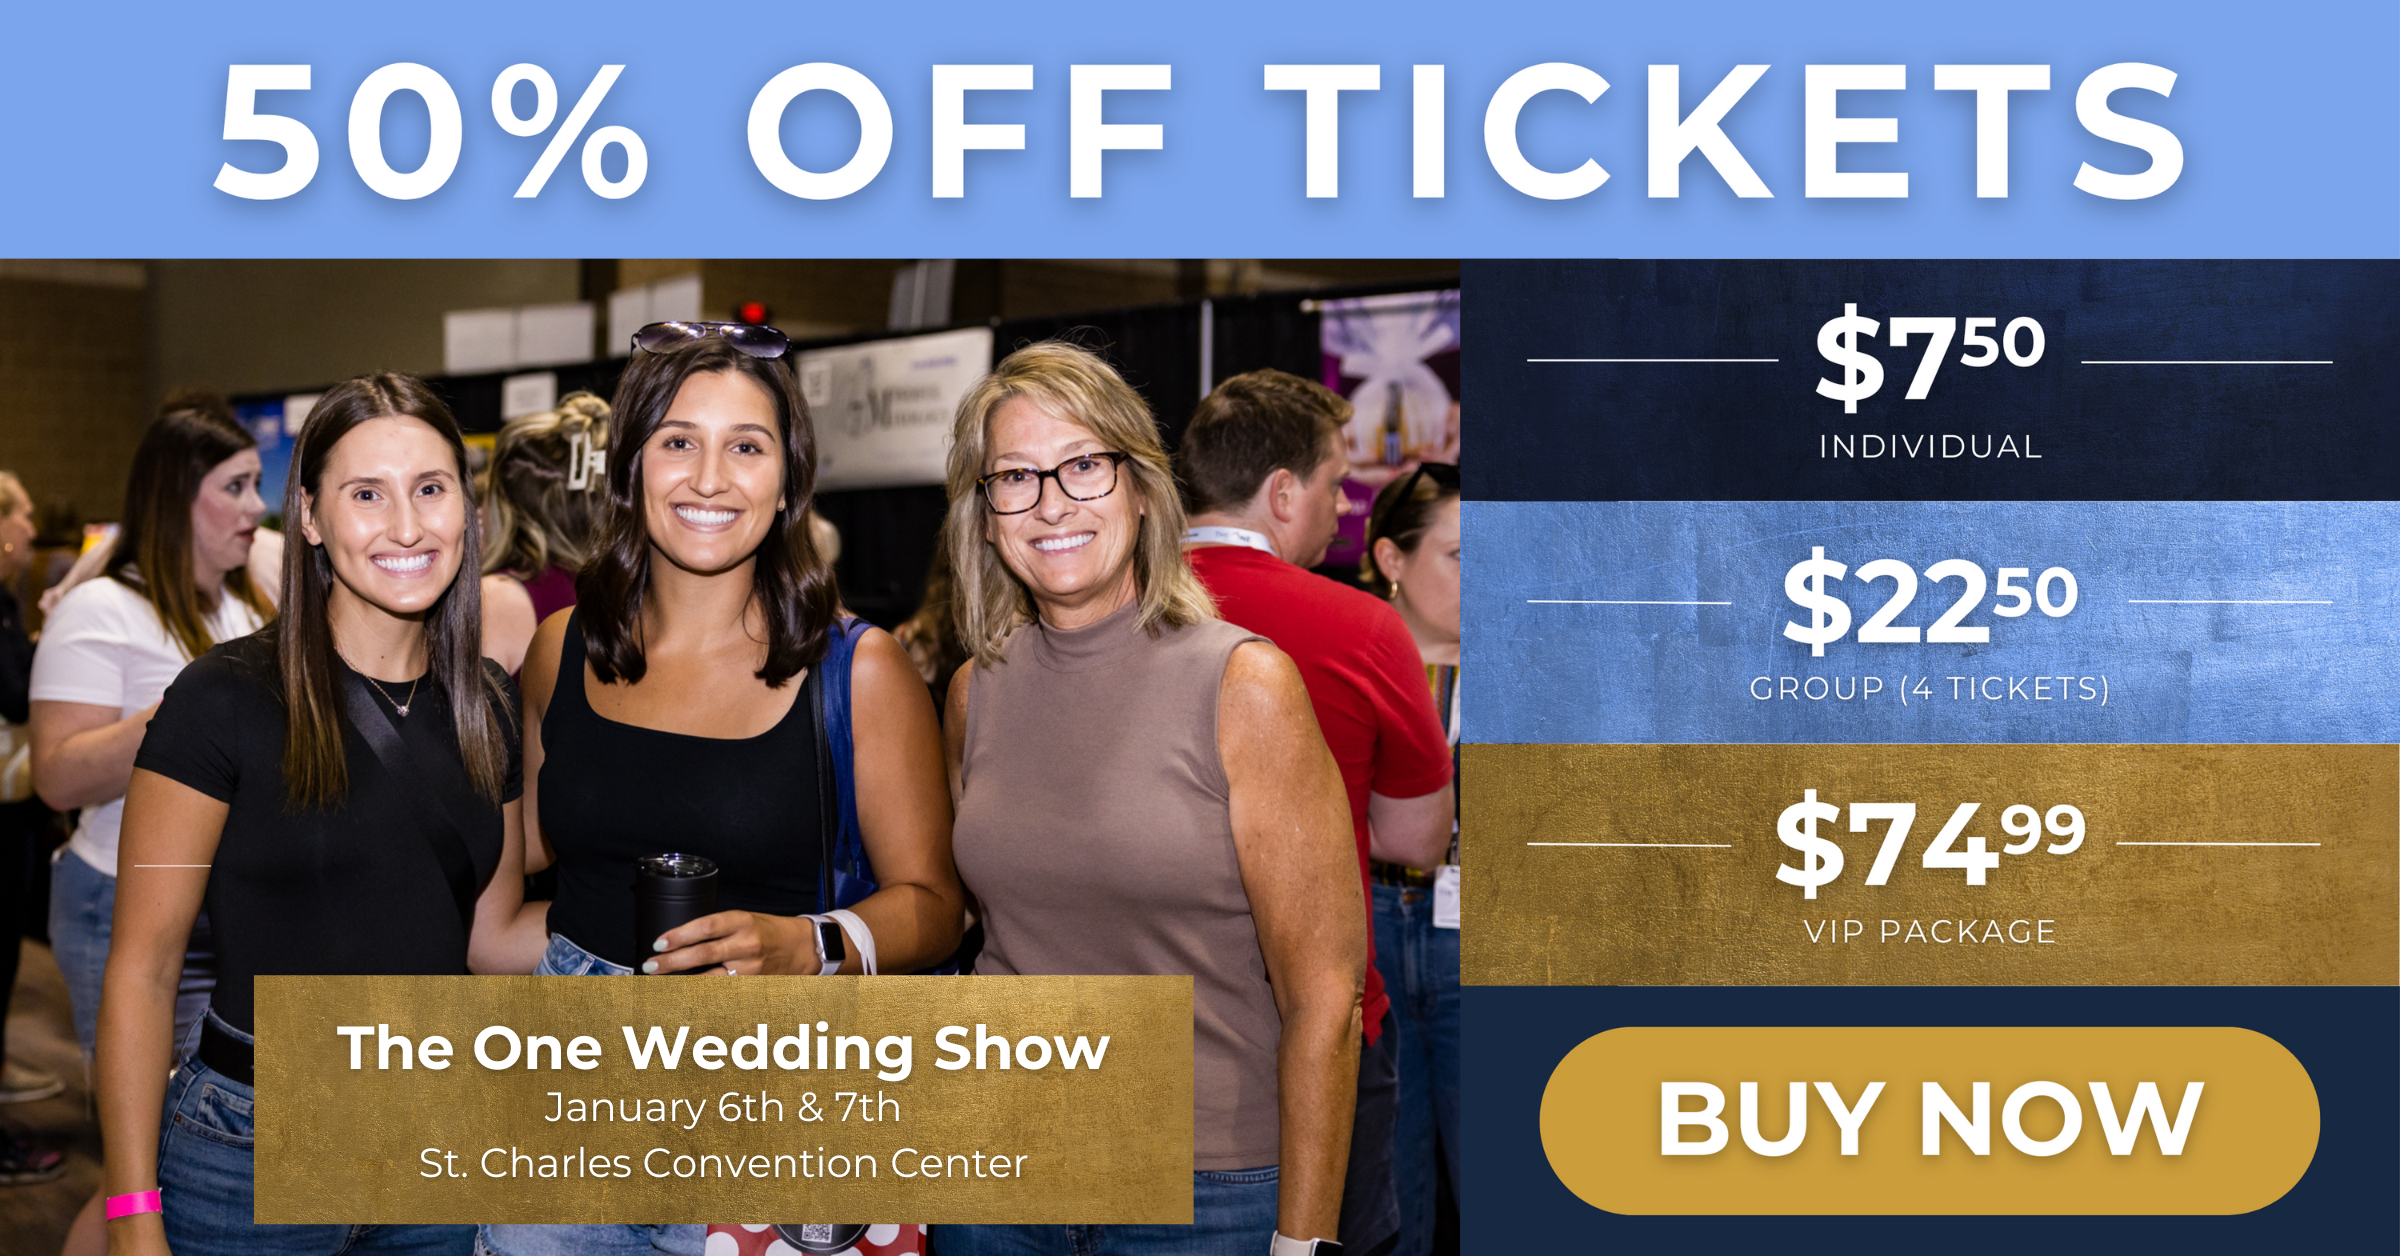 save 50% on tickets!